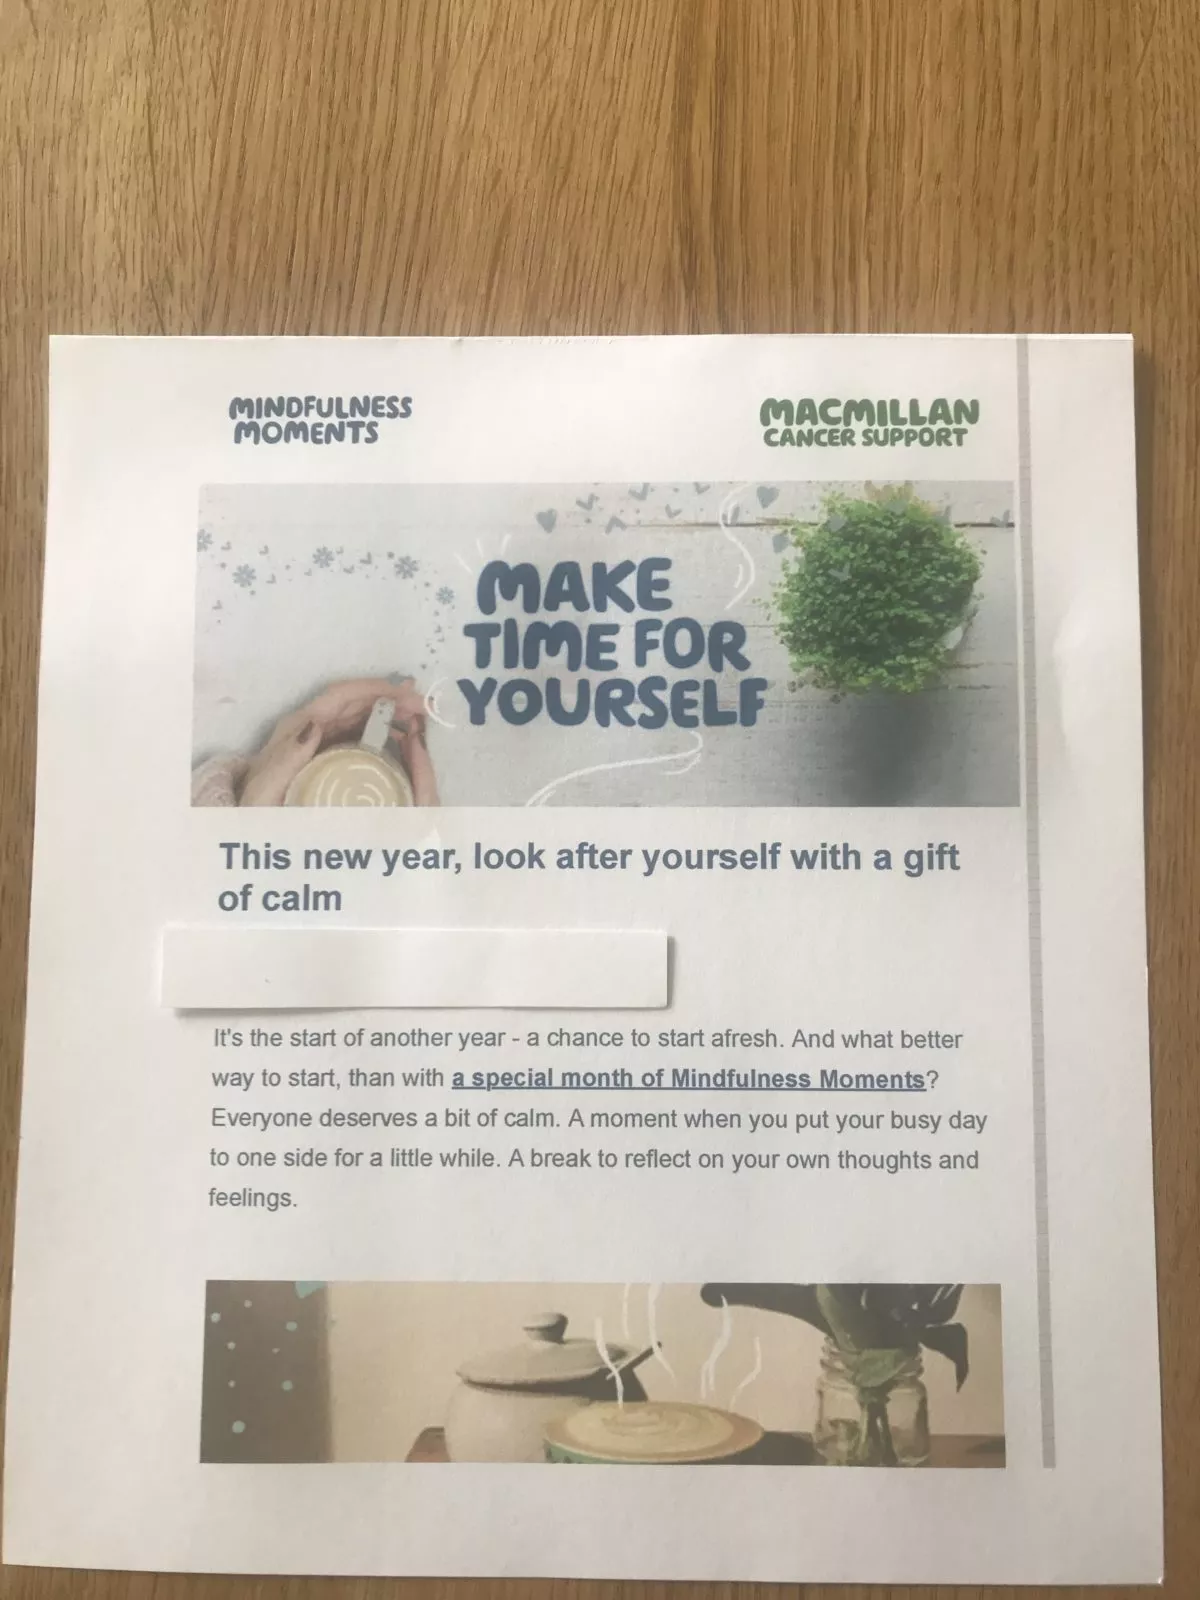 Macmillan fundraising appeal sent to a secret giver